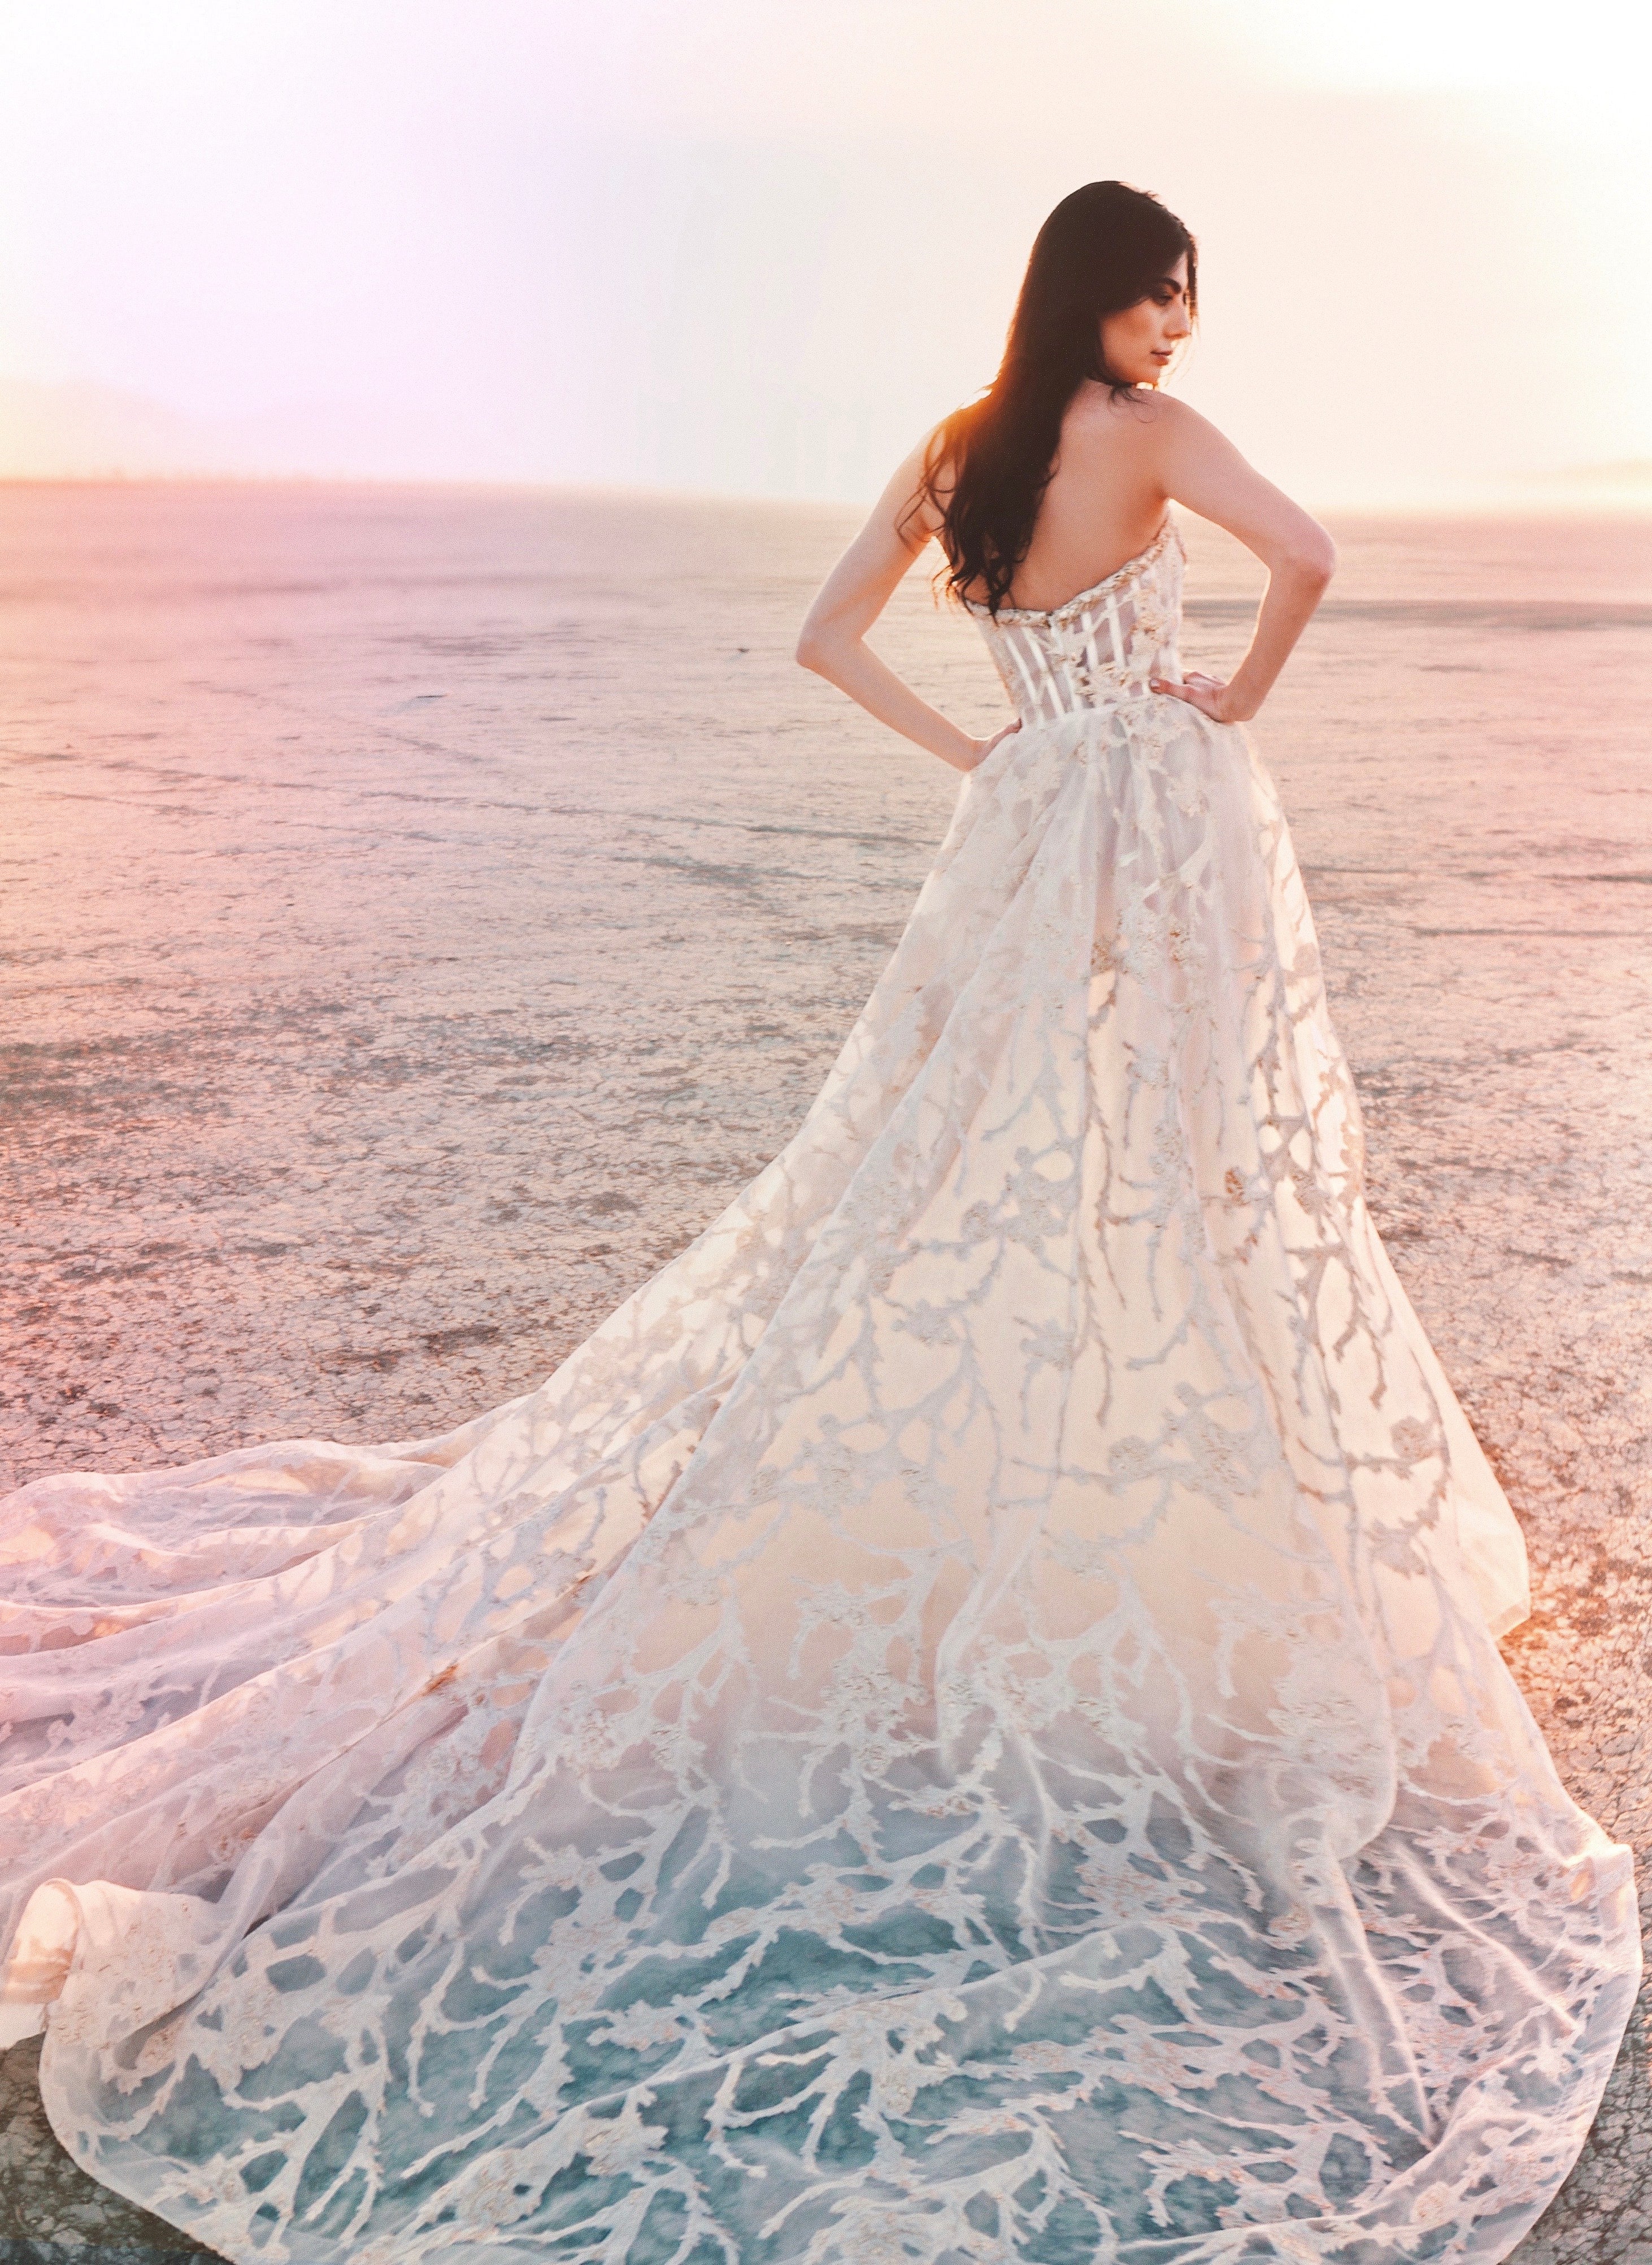 Ballgown wedding dress with long train and model has hands on hips